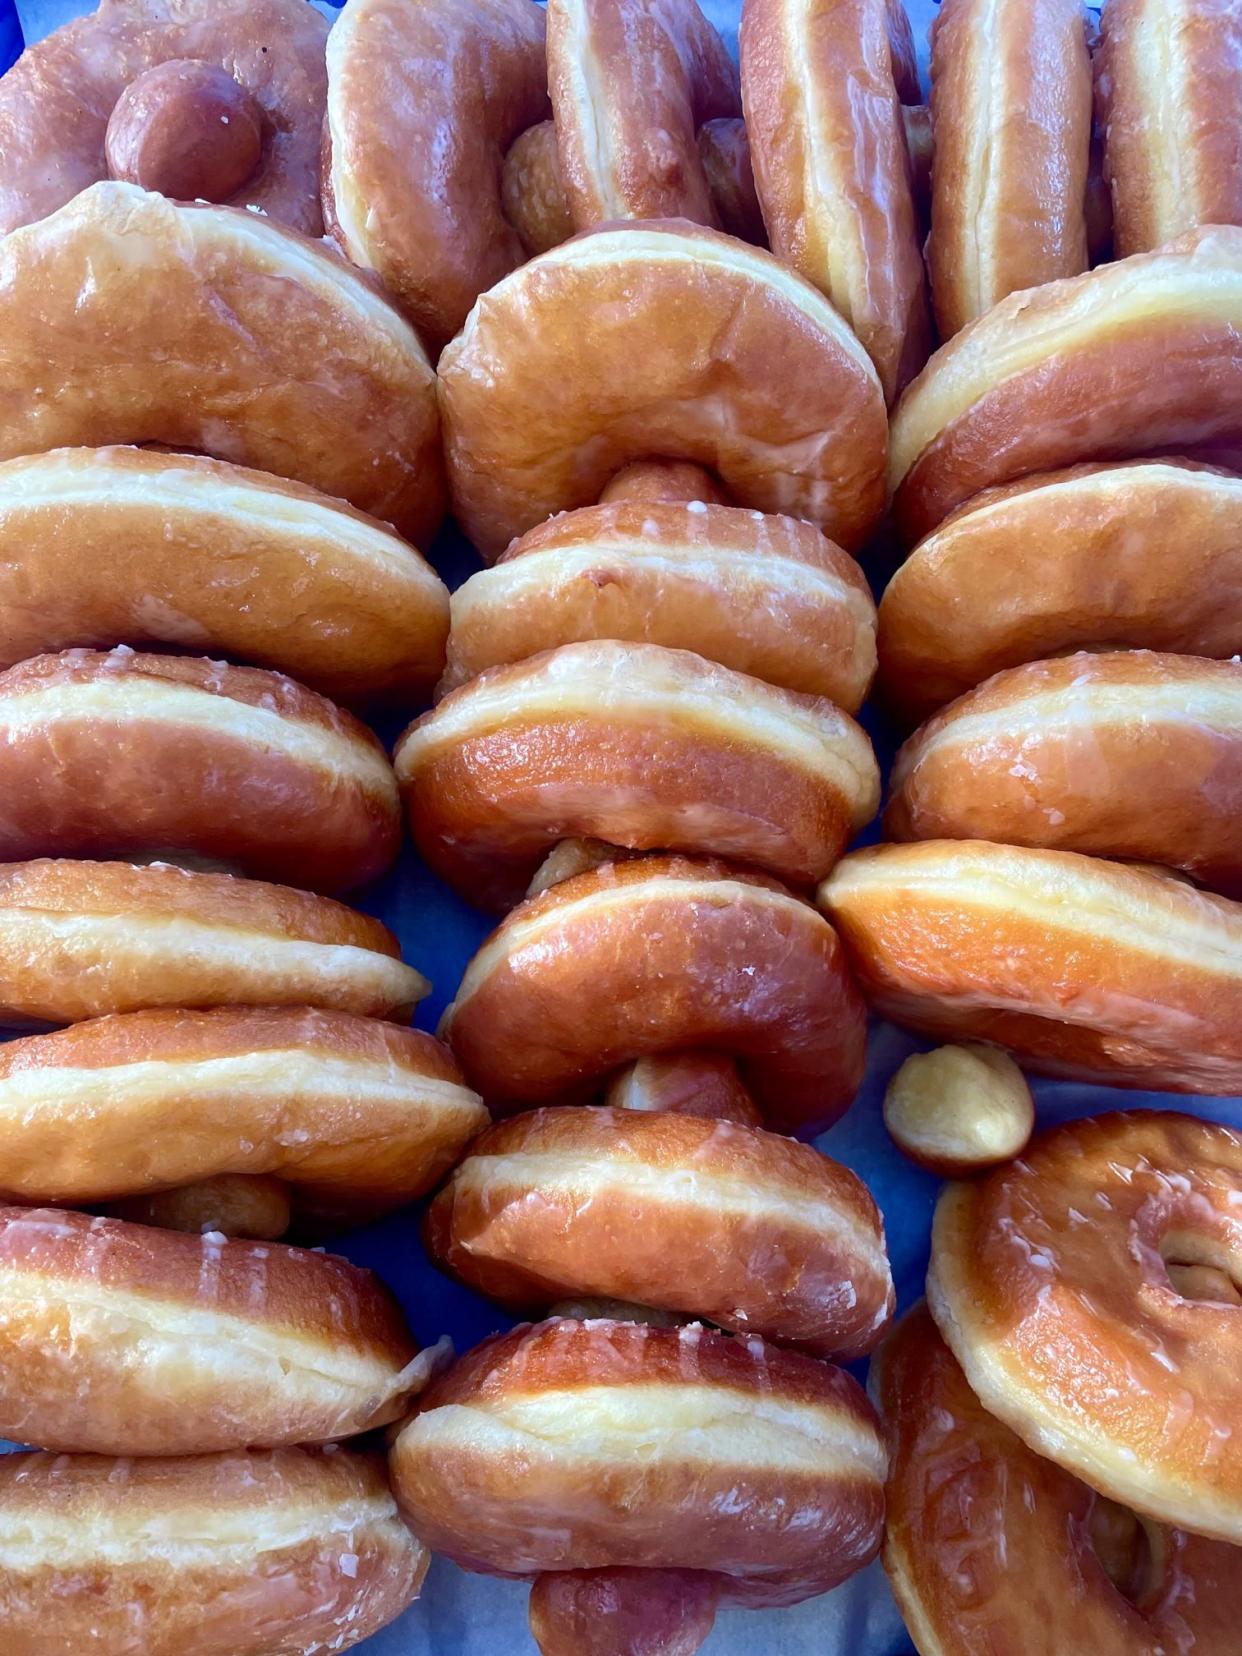 A full line up of New Old-Standard Bakery craft-made brioche donuts.